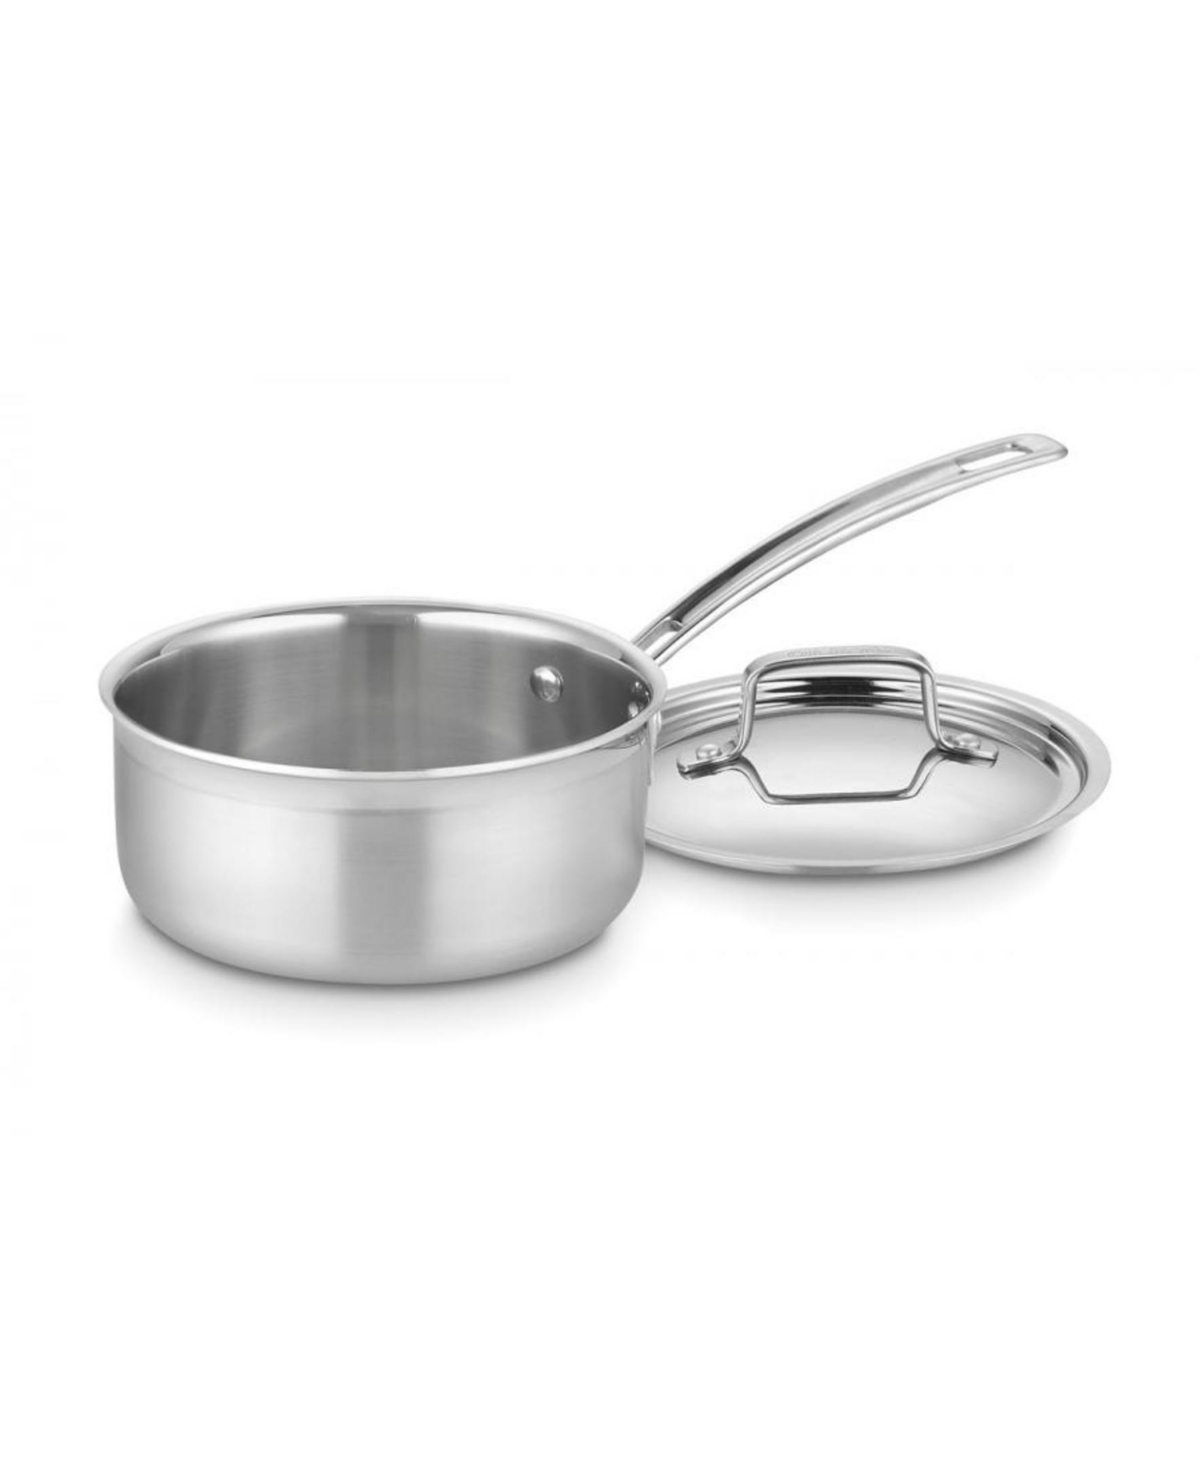 Cuisinart Multiclad Pro 1.5-qt. Saucepan With Cover In Stainless Steel